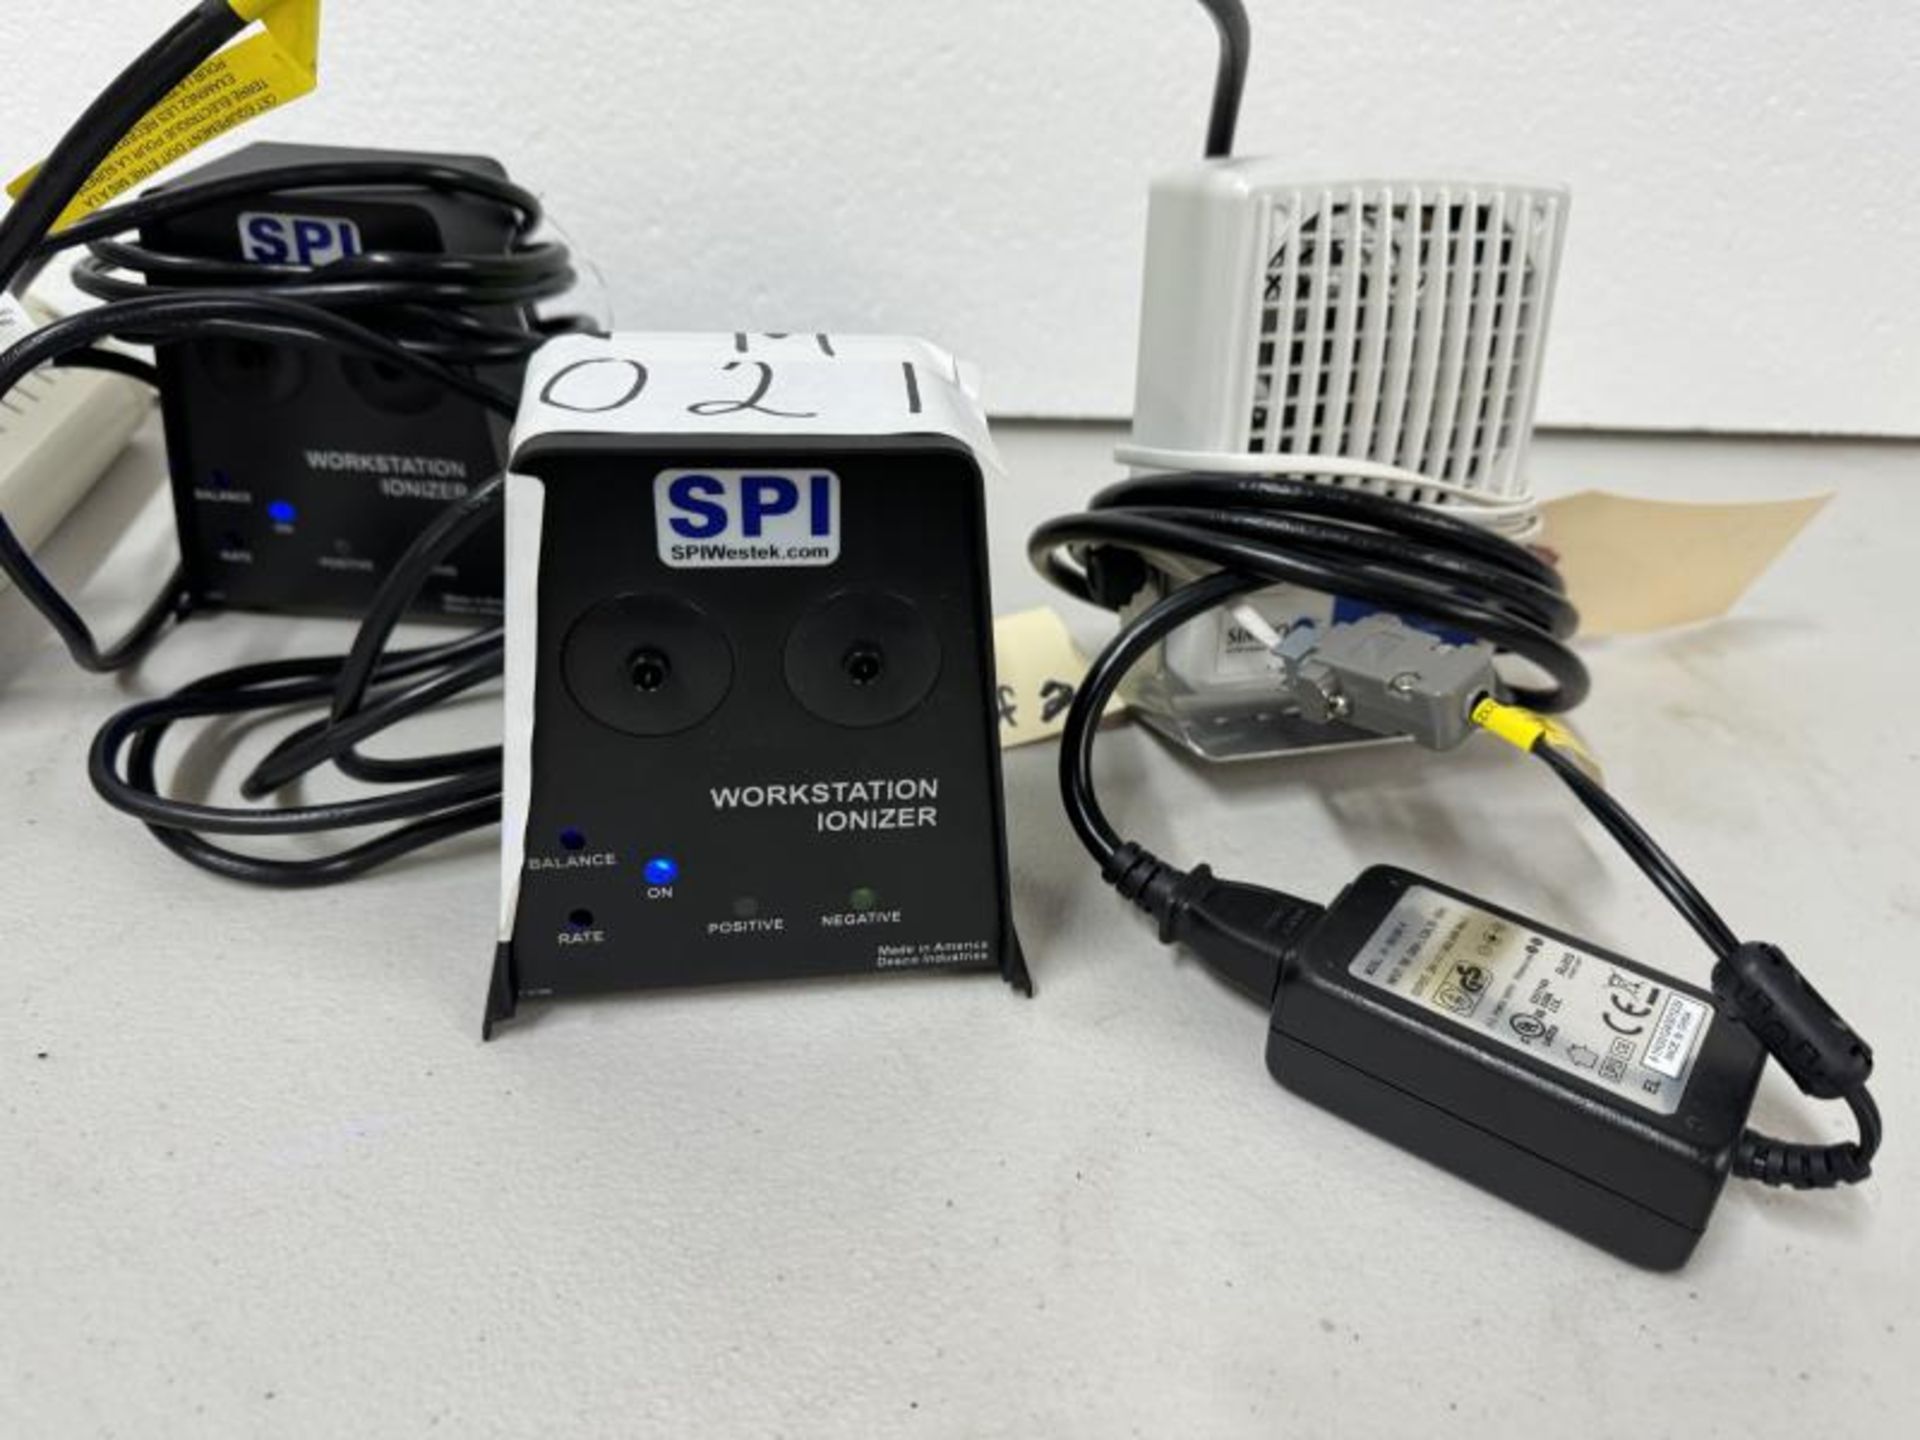 Lot of (3) Ioniers Including (2) SPI Workstation M: 94000 & (1) Simco Ionier Air Blower - Image 2 of 6